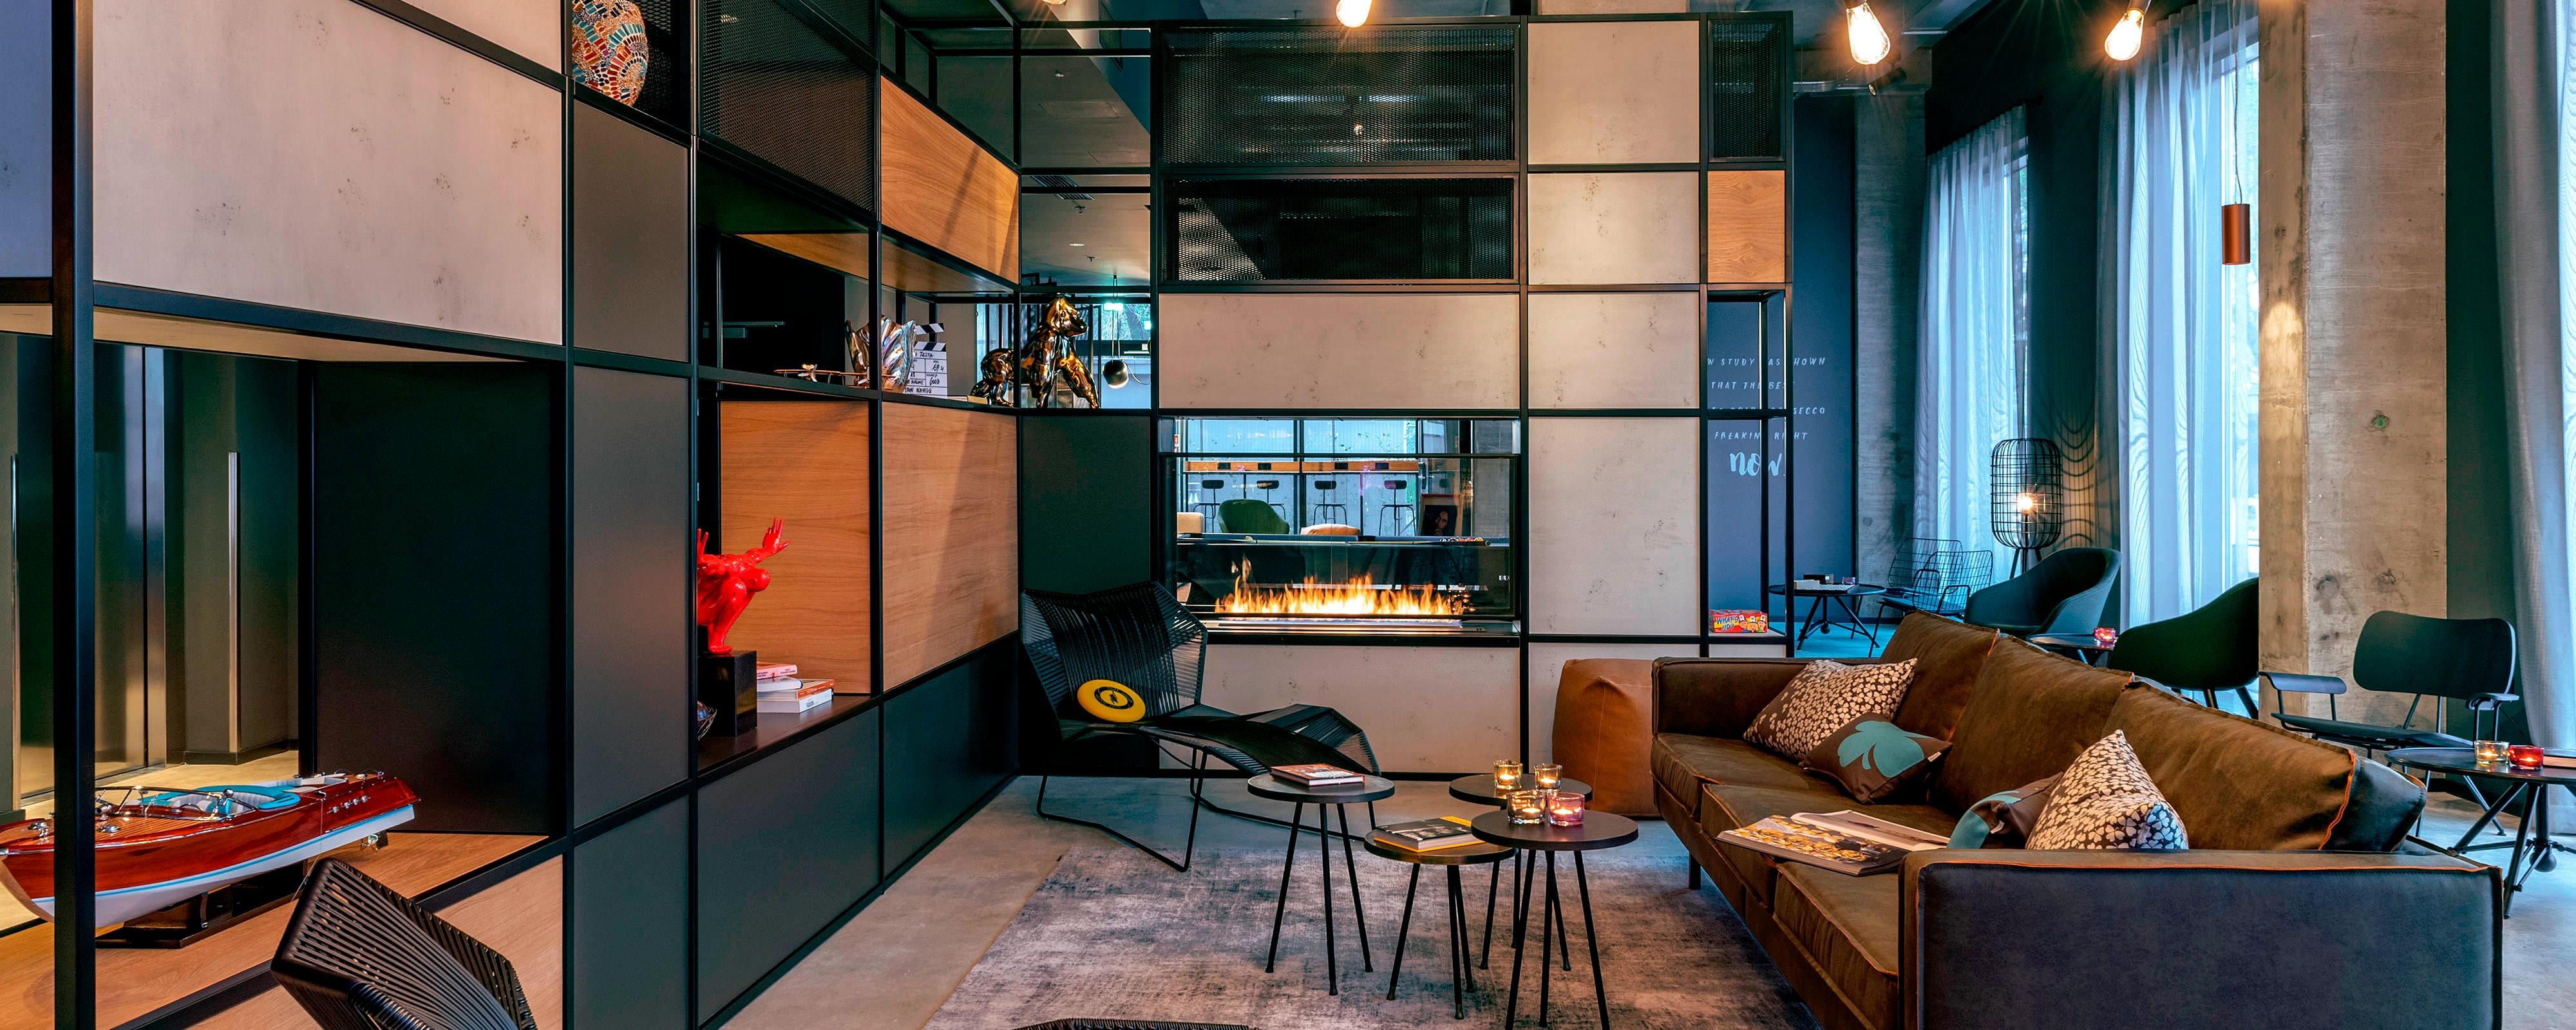 Image for Moxy Milan Linate Airport, a Marriott hotel.